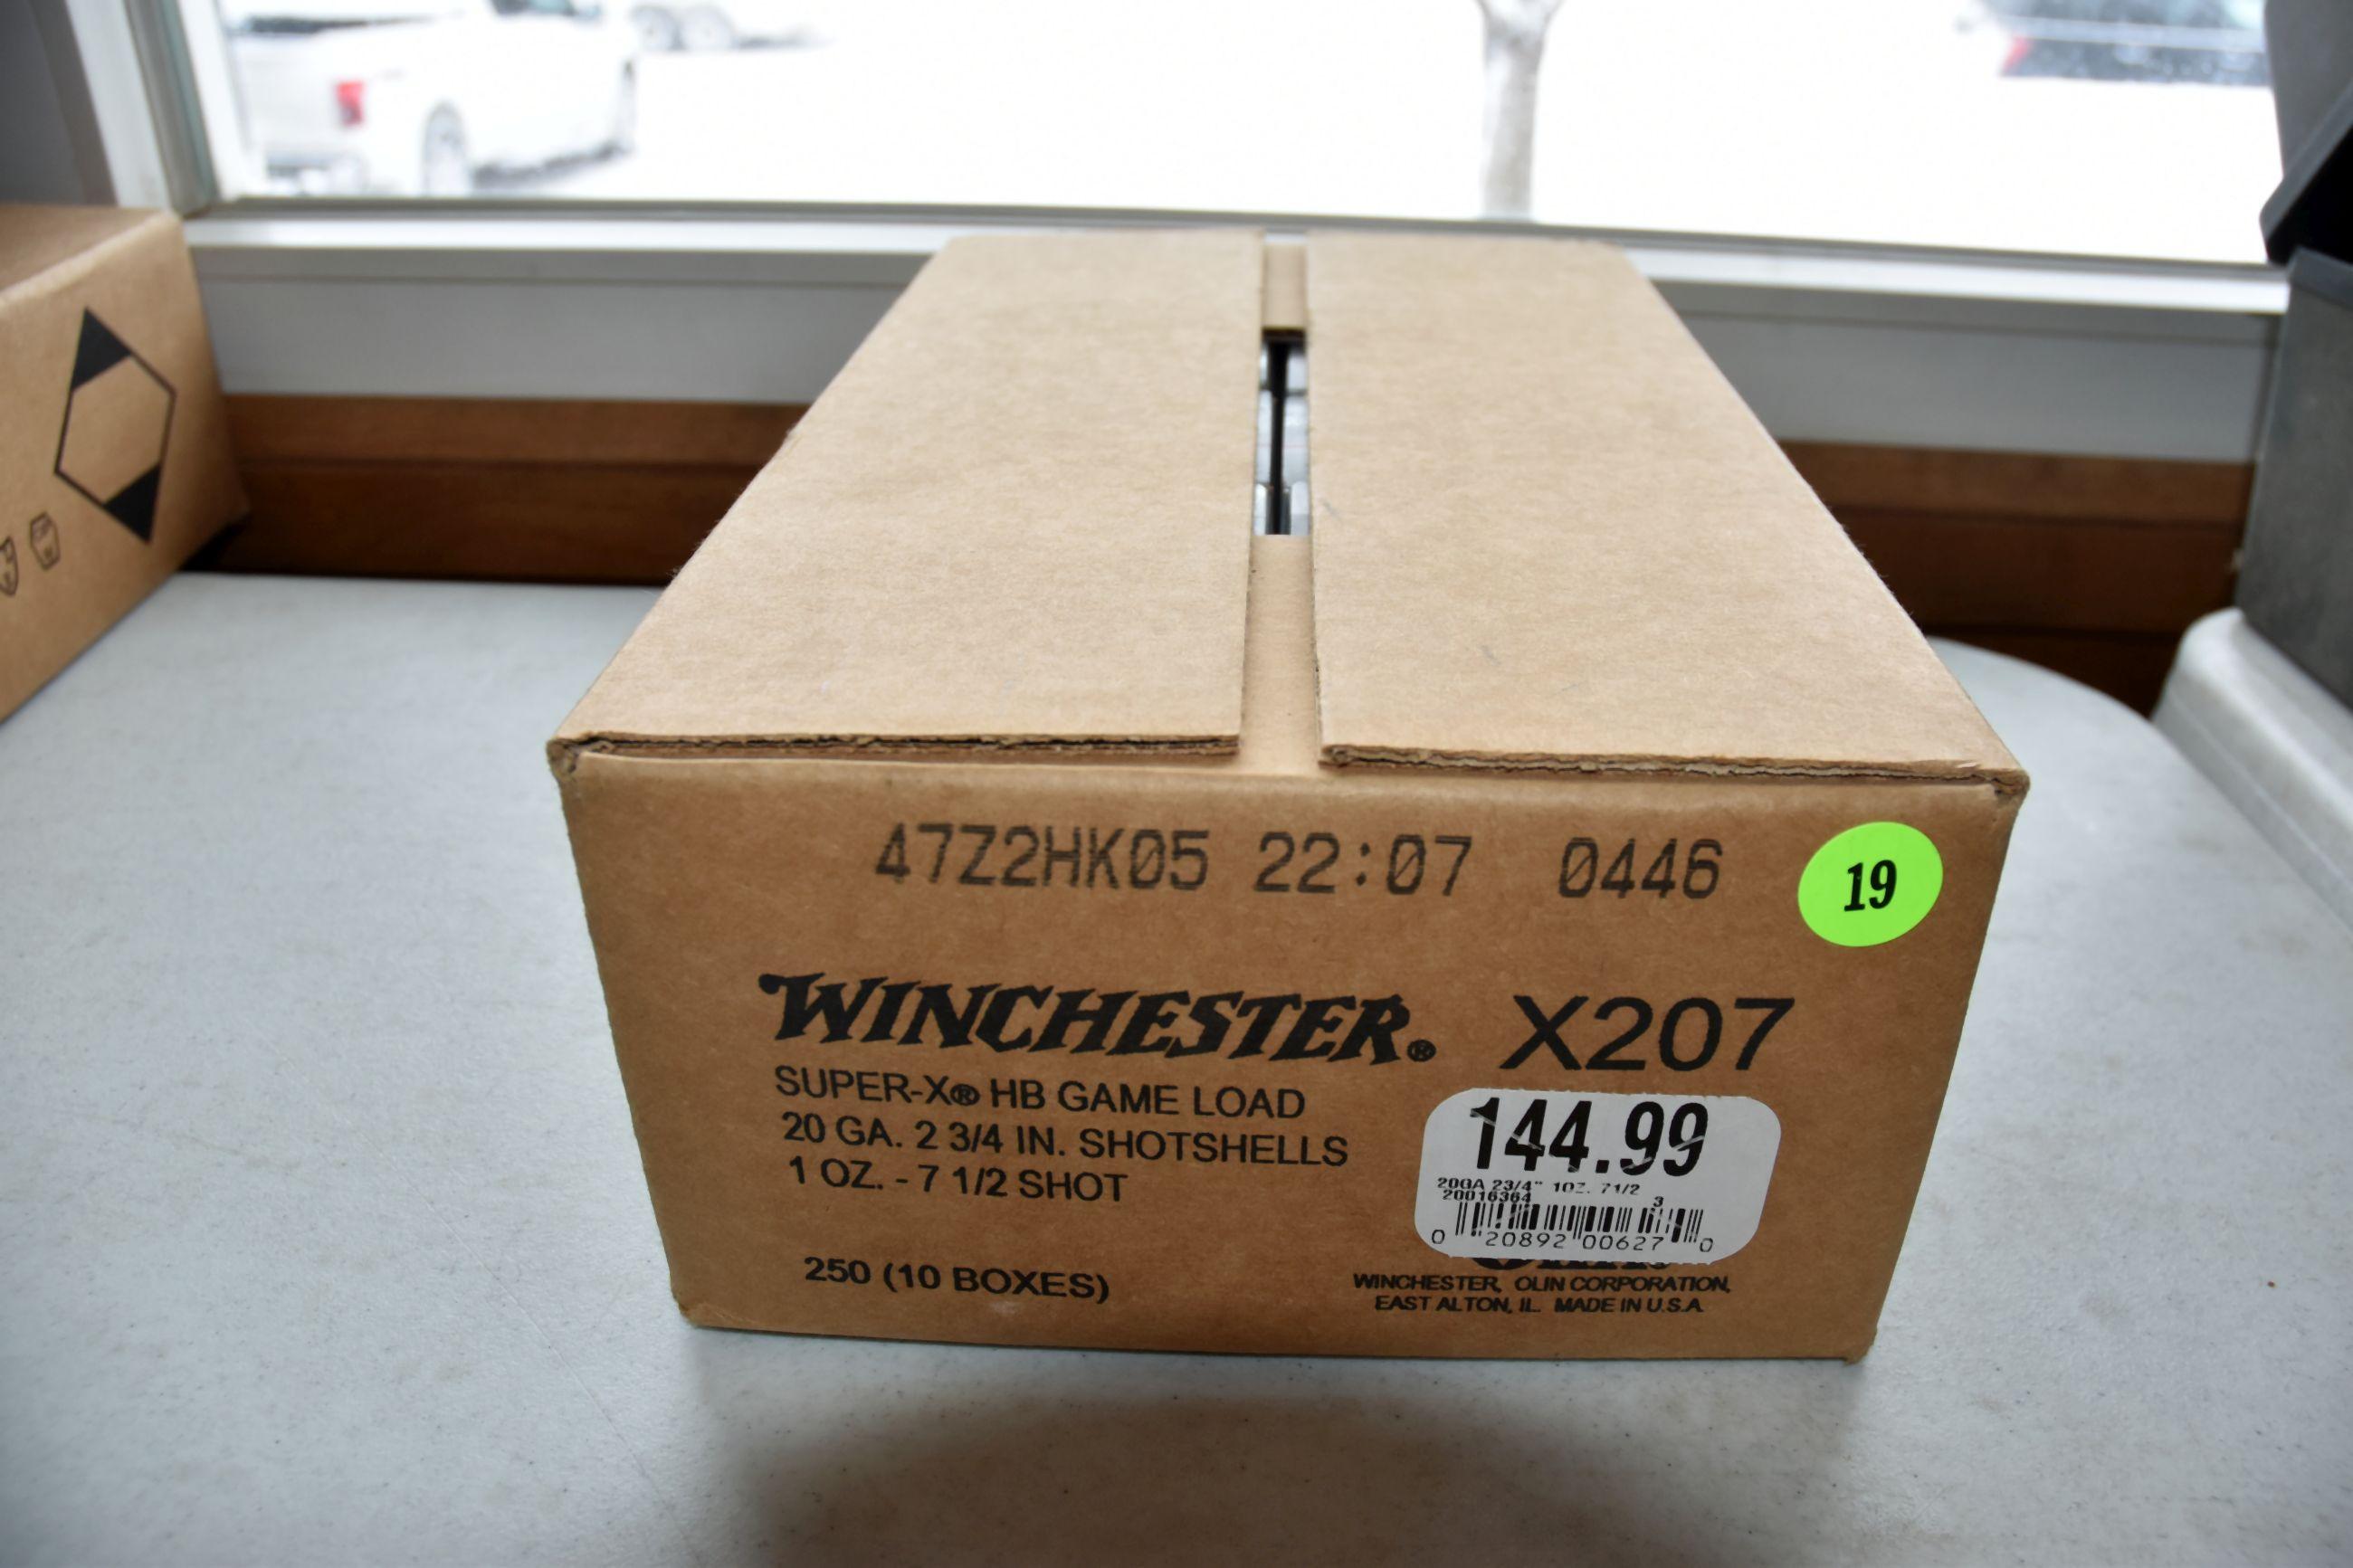 New Unopened Box of Winchester Super X HB Game Load 20 Gauge 2 3/4 inch Shot Shells